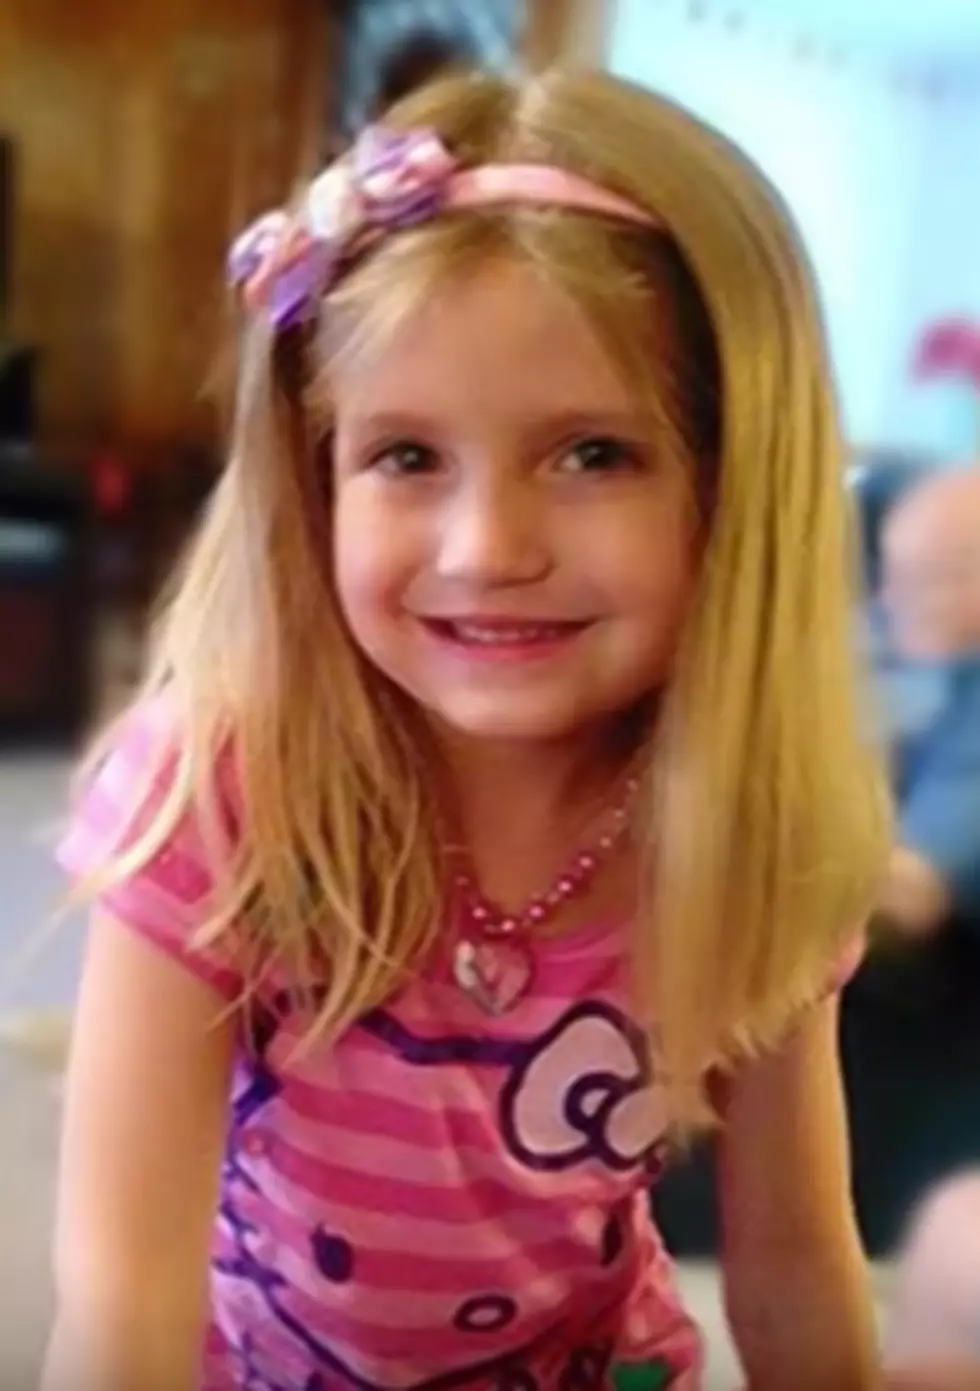 North Texas Family Blames Apple’s FaceTime for 5-Year-Old Daughter’s Tragic Death